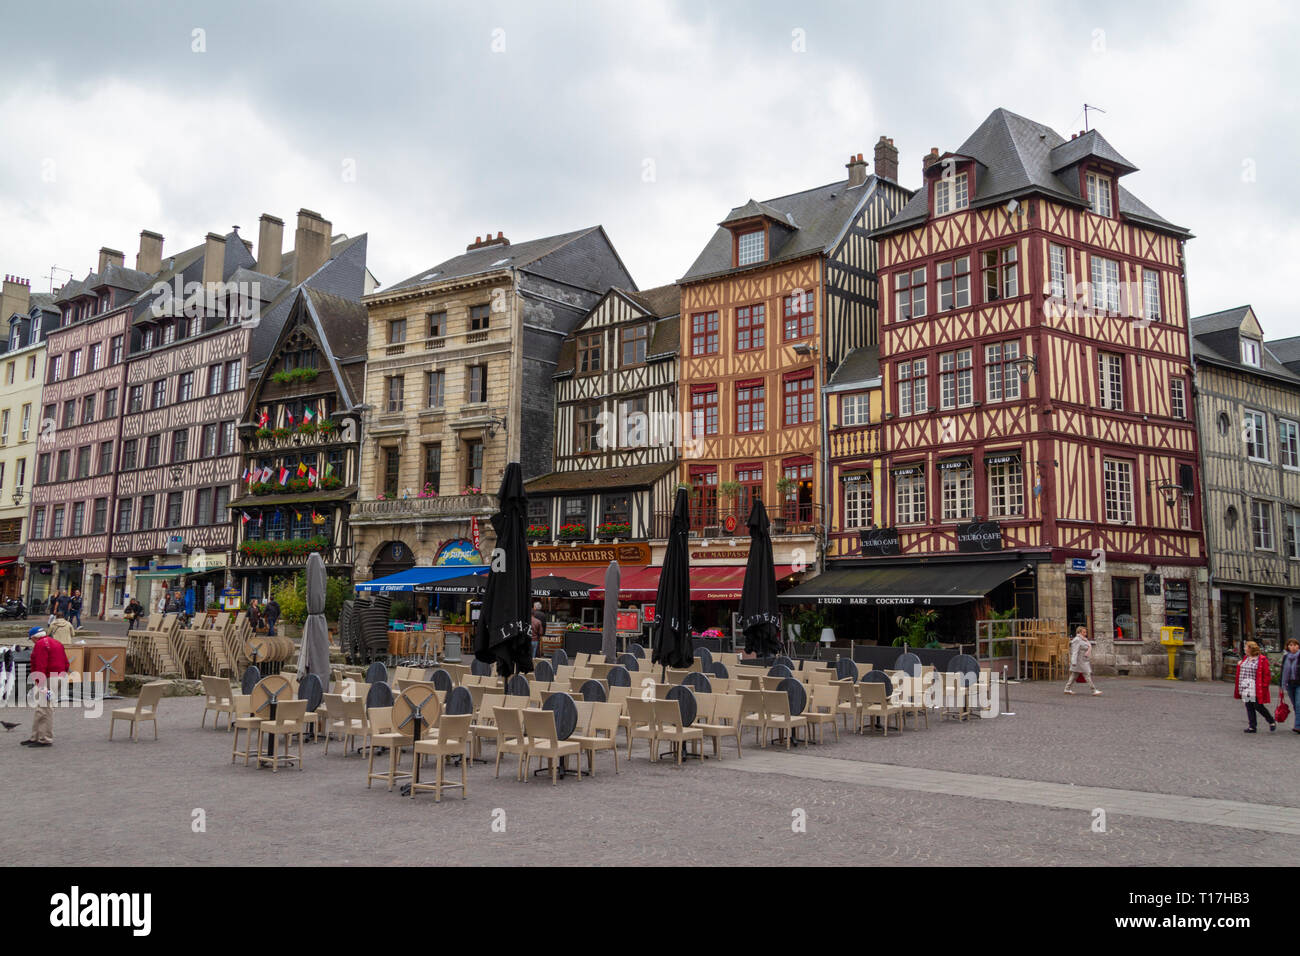 General view of old buildings along Rue de la Pie in central Rouen, France.  This area is close to the historic centre of Rouen. Stock Photo